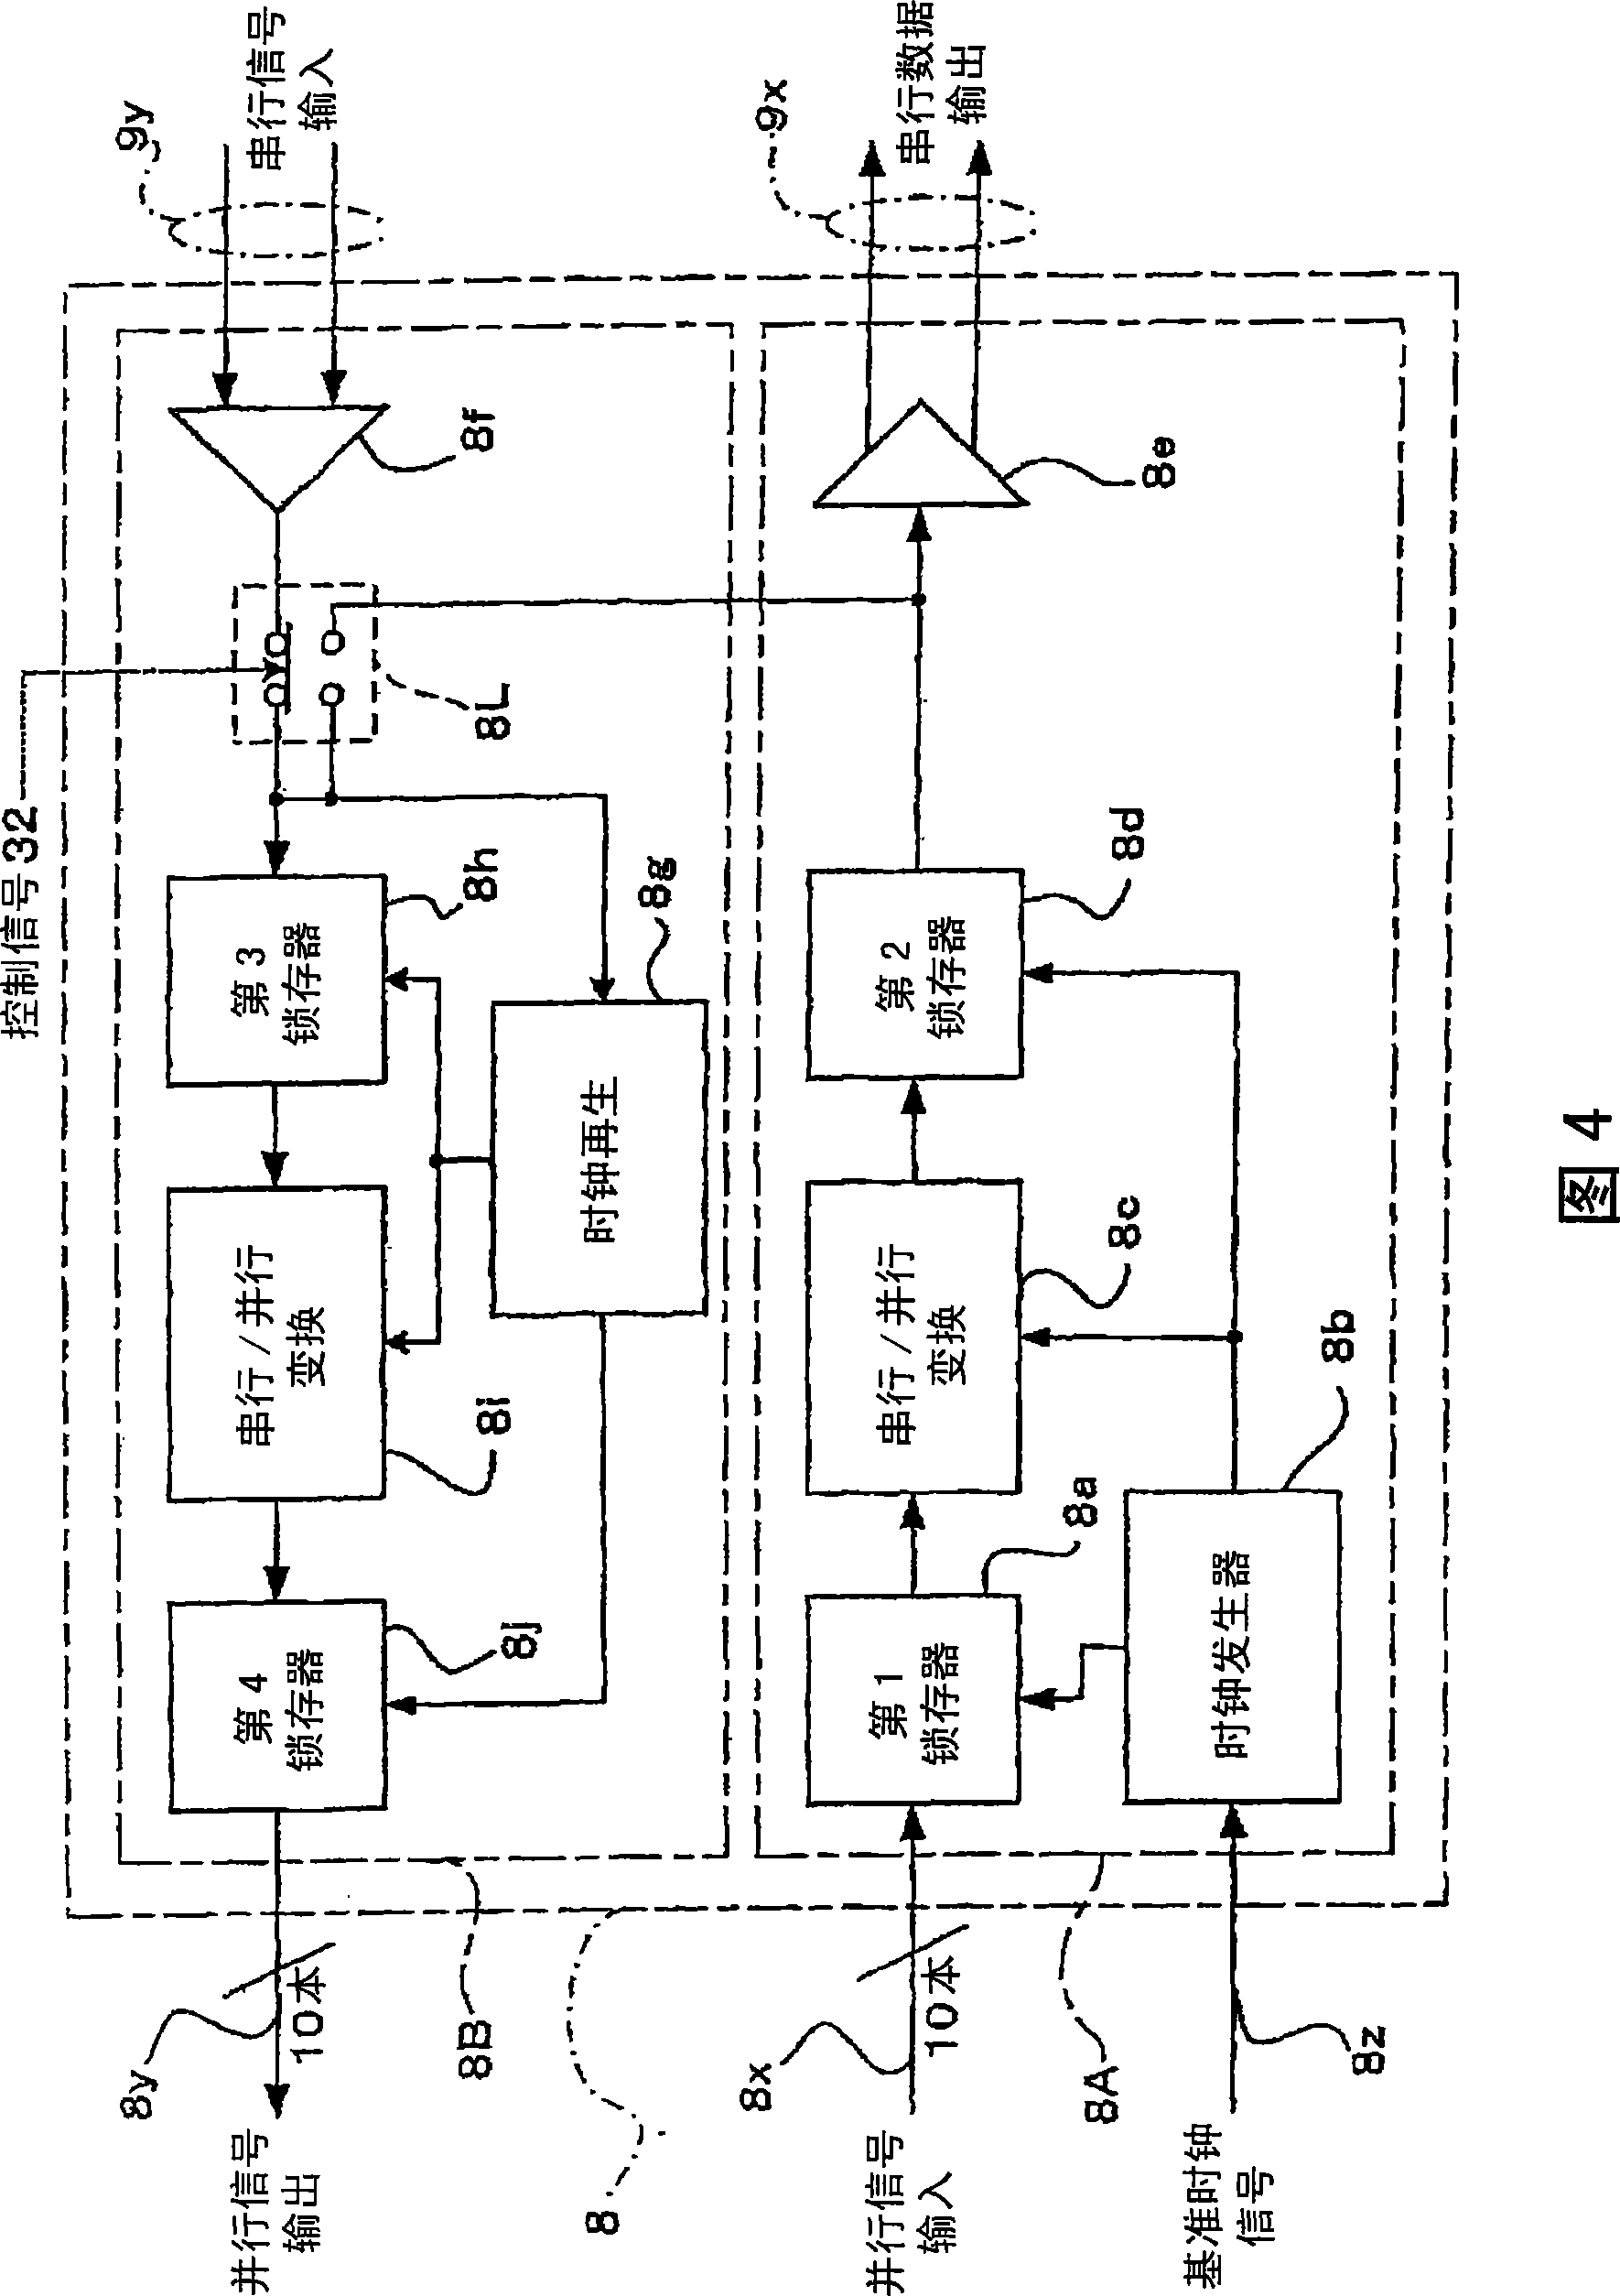 Subscriber premise optical line terminating apparatus and optical transmission system